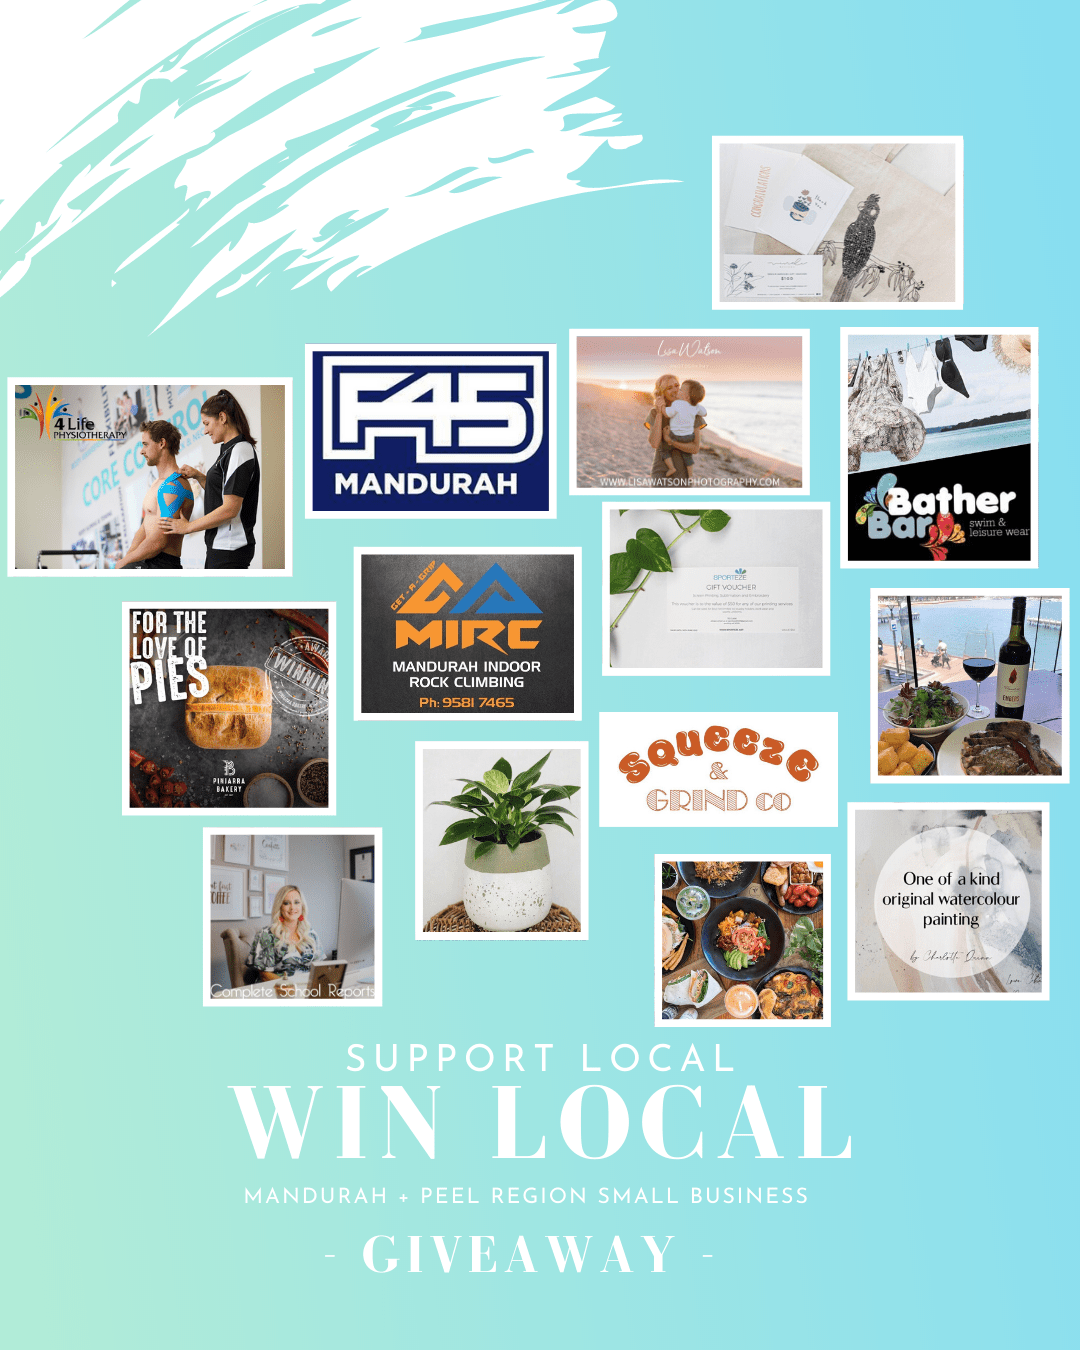 SUPPORT LOCAL - WIN LOCAL 🙌🏼 It’s been tough for small businesses over the past few months but we have all stayed strong because of the support we have received from you and our amazing community. 💙 To recognise our awesome town and the fantastic small businesses we have around us, we are giving you the chance to win the following: WIN: 👇🏻 @4lifephysiotherapy : $150.00 voucher @f45training_mandurah : 1 month free training worth $280.00 @lisawatsonphotography : $150.00 towards a beach photoshoot portrait session @vindidesigns : A tote bag, gift cards and $100.00 design services voucher @thebatherbar : $50.00 voucher and a beach pack @pinjarra_bakery : $50.00 voucher @lovechardesigns : a custom one off painting valued at $120.00 @sportezemandurah : $50.00 for printing or printing embroidery @mandurah_indoor_rock_climbing : 1 month adult membership, harness hire included worth $110.00 @brewvinobar : $50.00 voucher @completeschoolreports : 6 month subscription, this is transferable to a primary school teacher you know valued at $50.00 @the.wandering.leaf : Plant and concrete pot worth $55.00 @squeezeandgrindco : $25.00 voucher @thehummingbirdwatersidecafe : $25.00 voucher Valued at over $1200! HOW TO ENTER: Make sure you are following every small business involved (14 accounts) Tag a mate